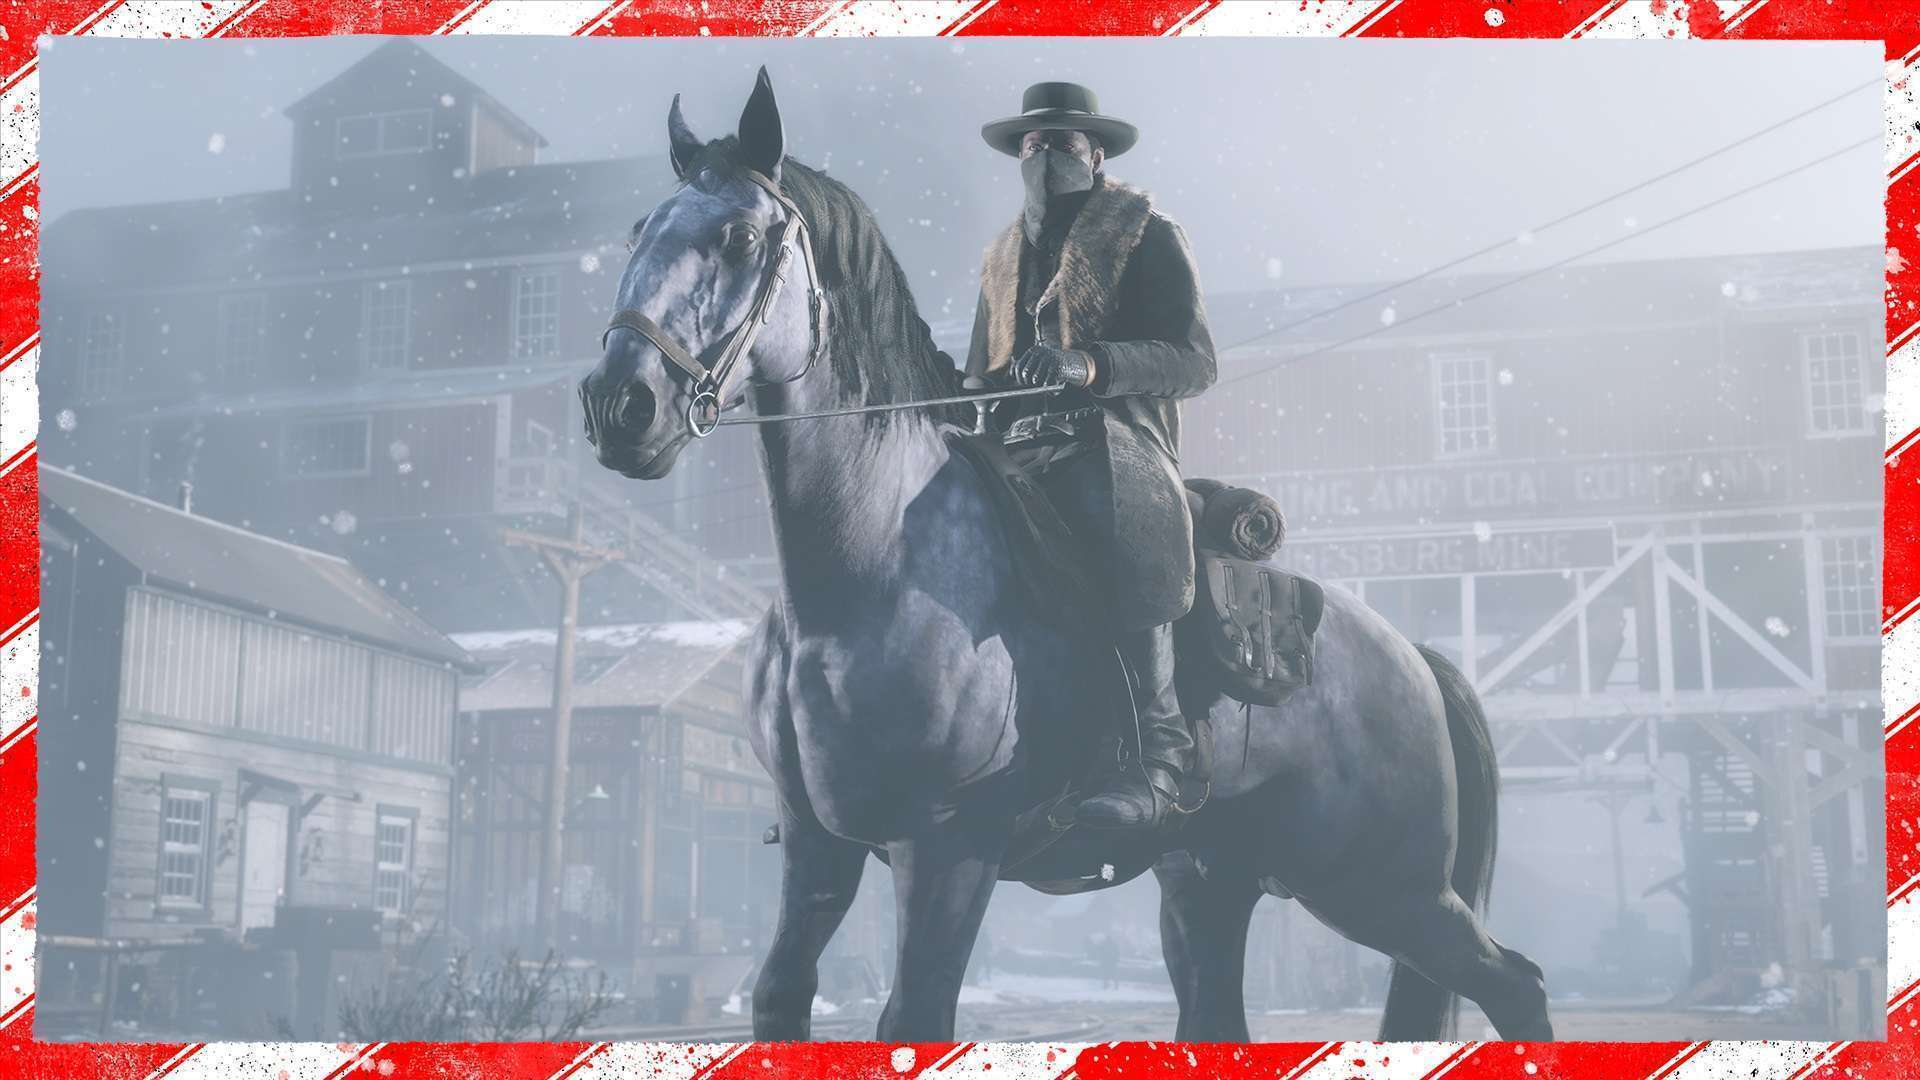 Red Dead Online Celebrates the Holidays with Snowfall, Festive Showdown Modes, Gifts, Decorations, Bonuses, Discounts, and More 